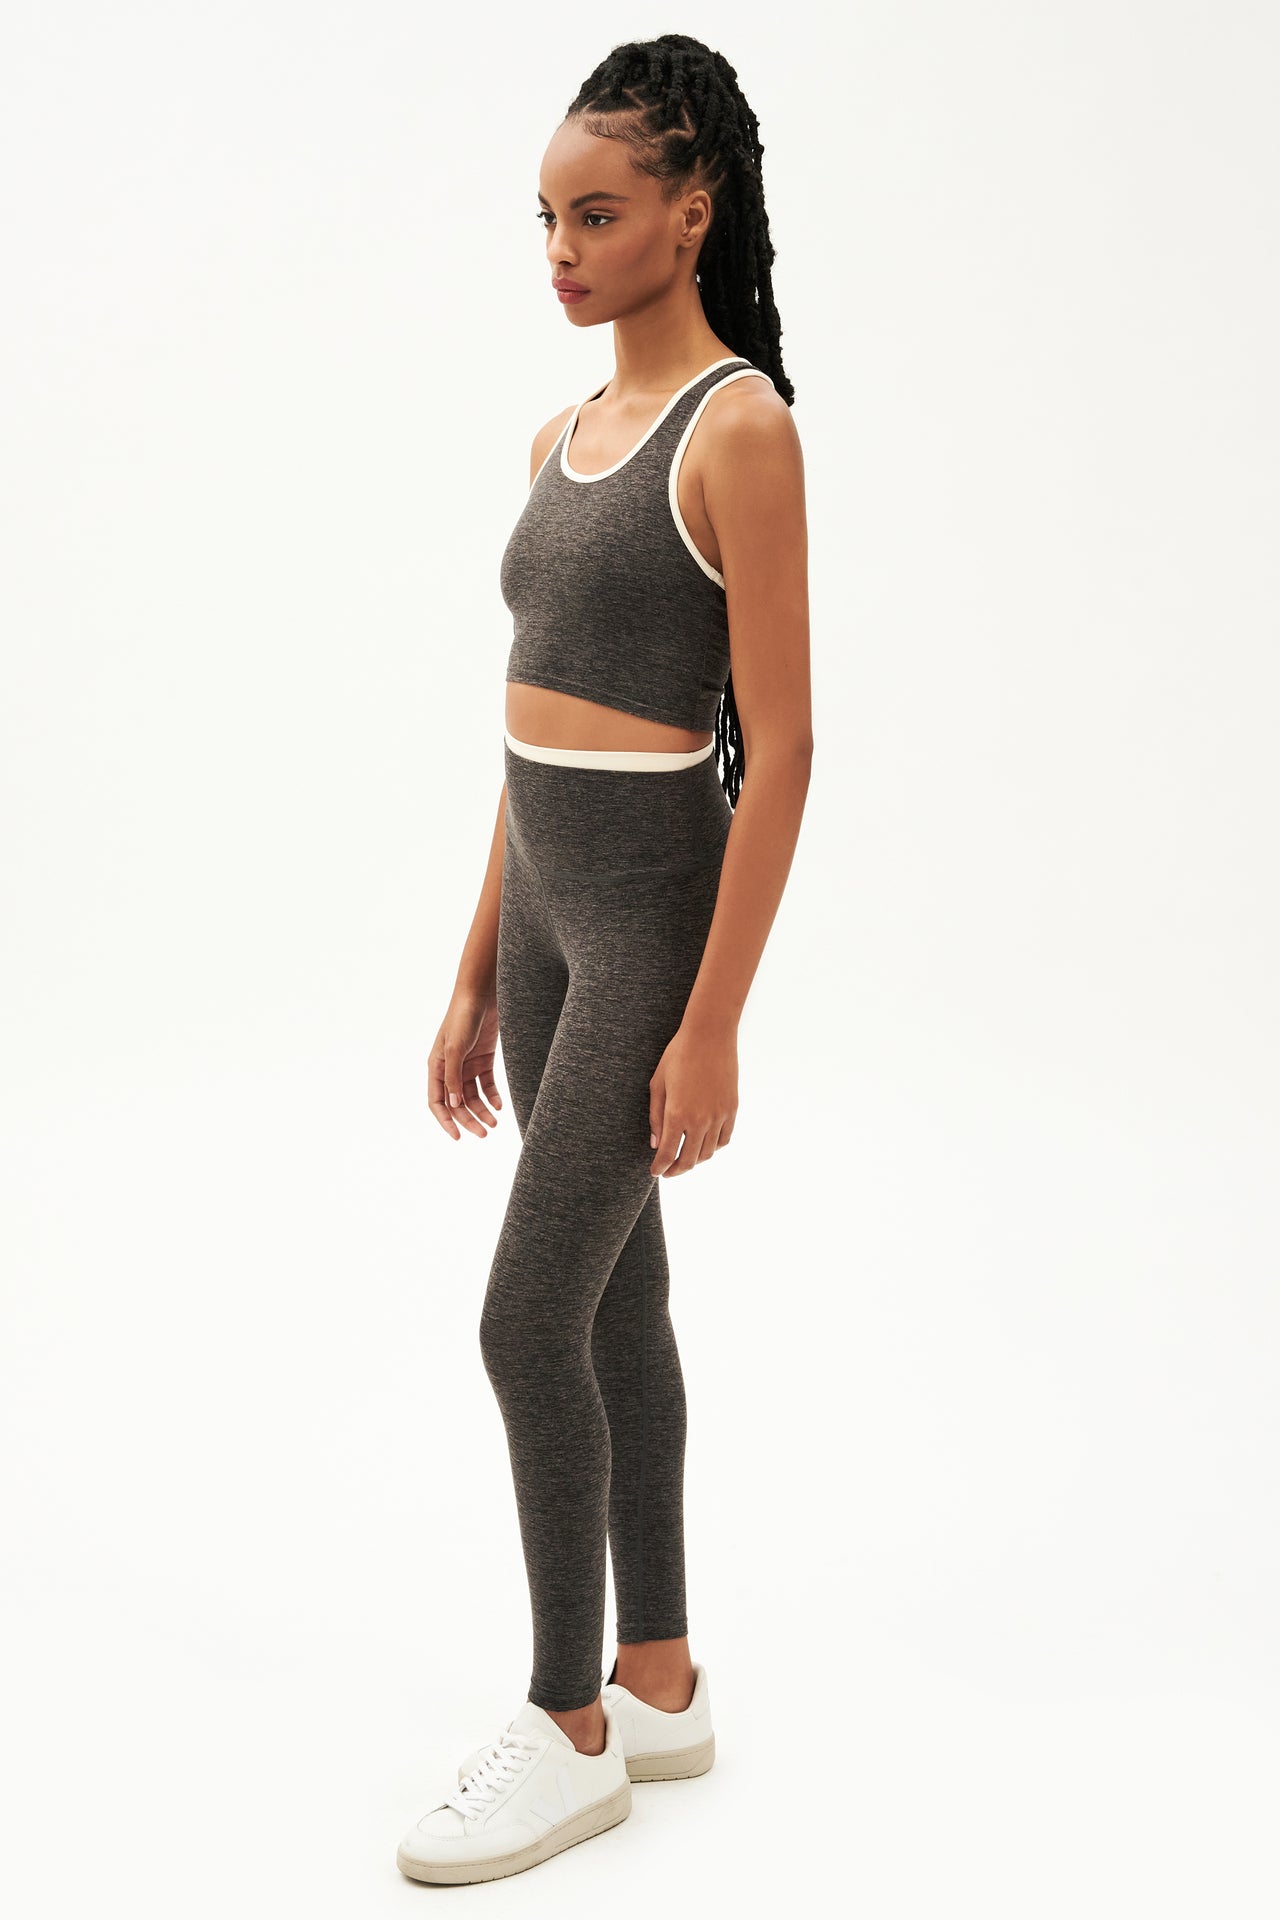 Full side view of girl wearing dark grey leggings with thin white band around waist and dark grey tank top with white shoes